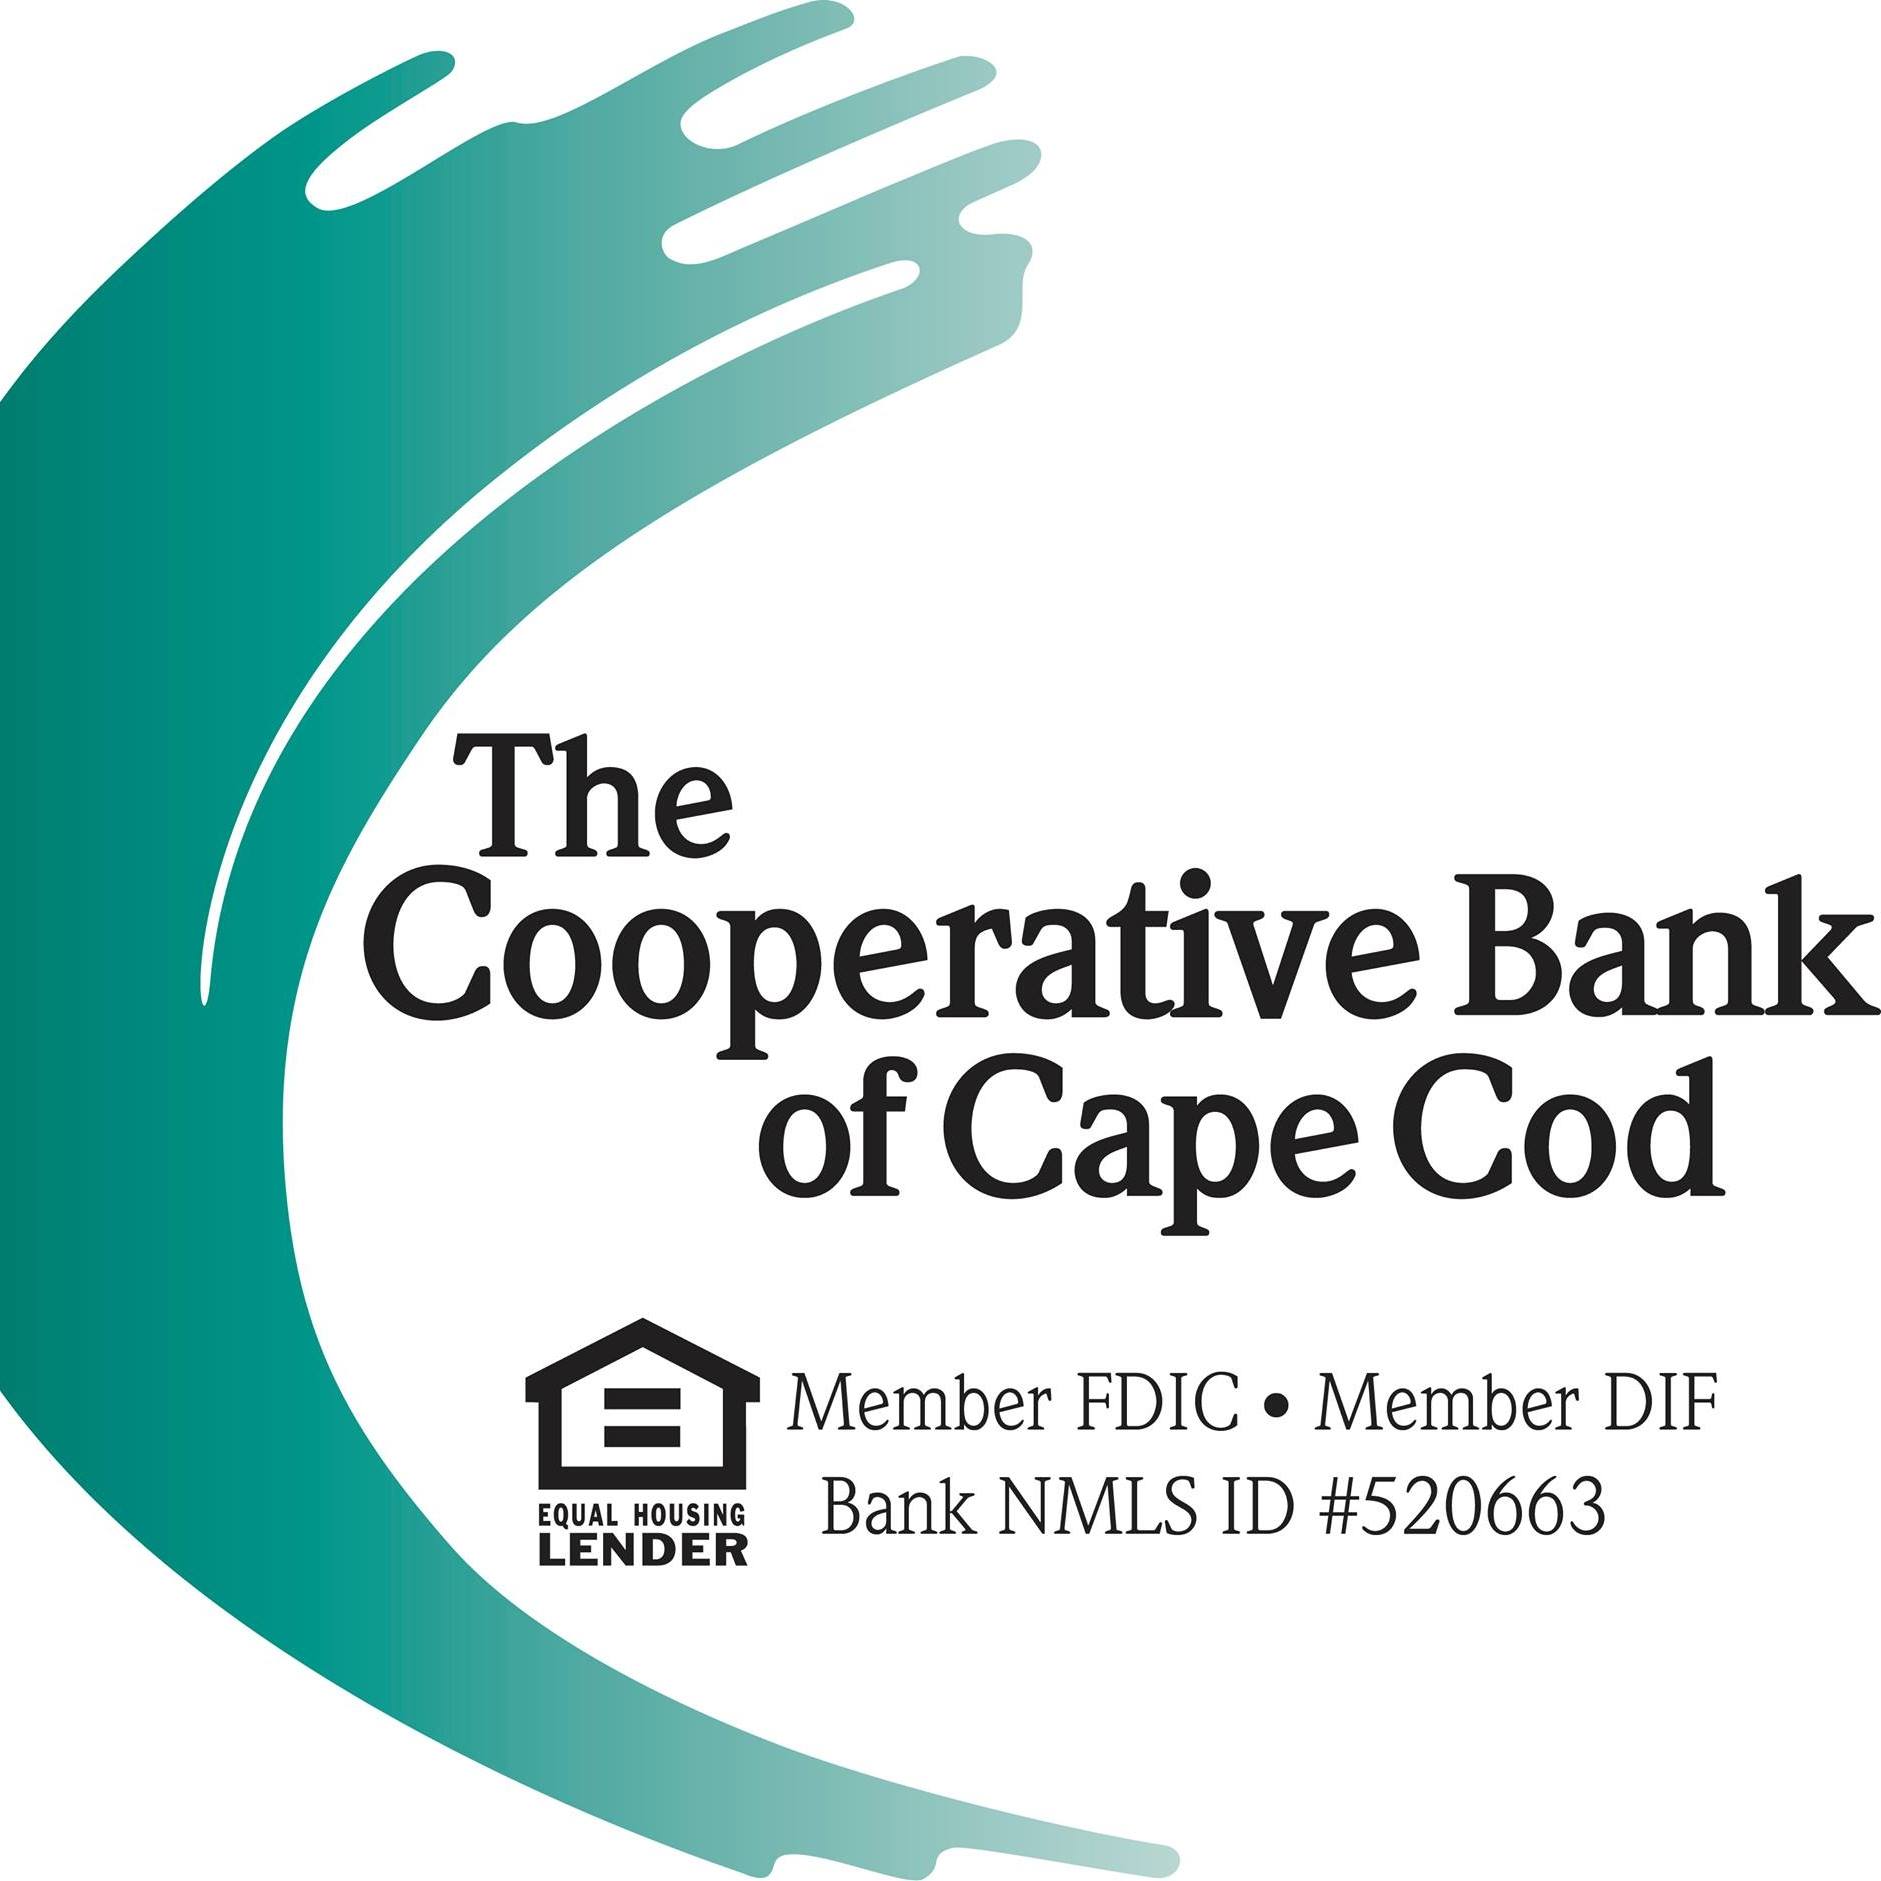 Cooperative Bank of Cape Cod, The